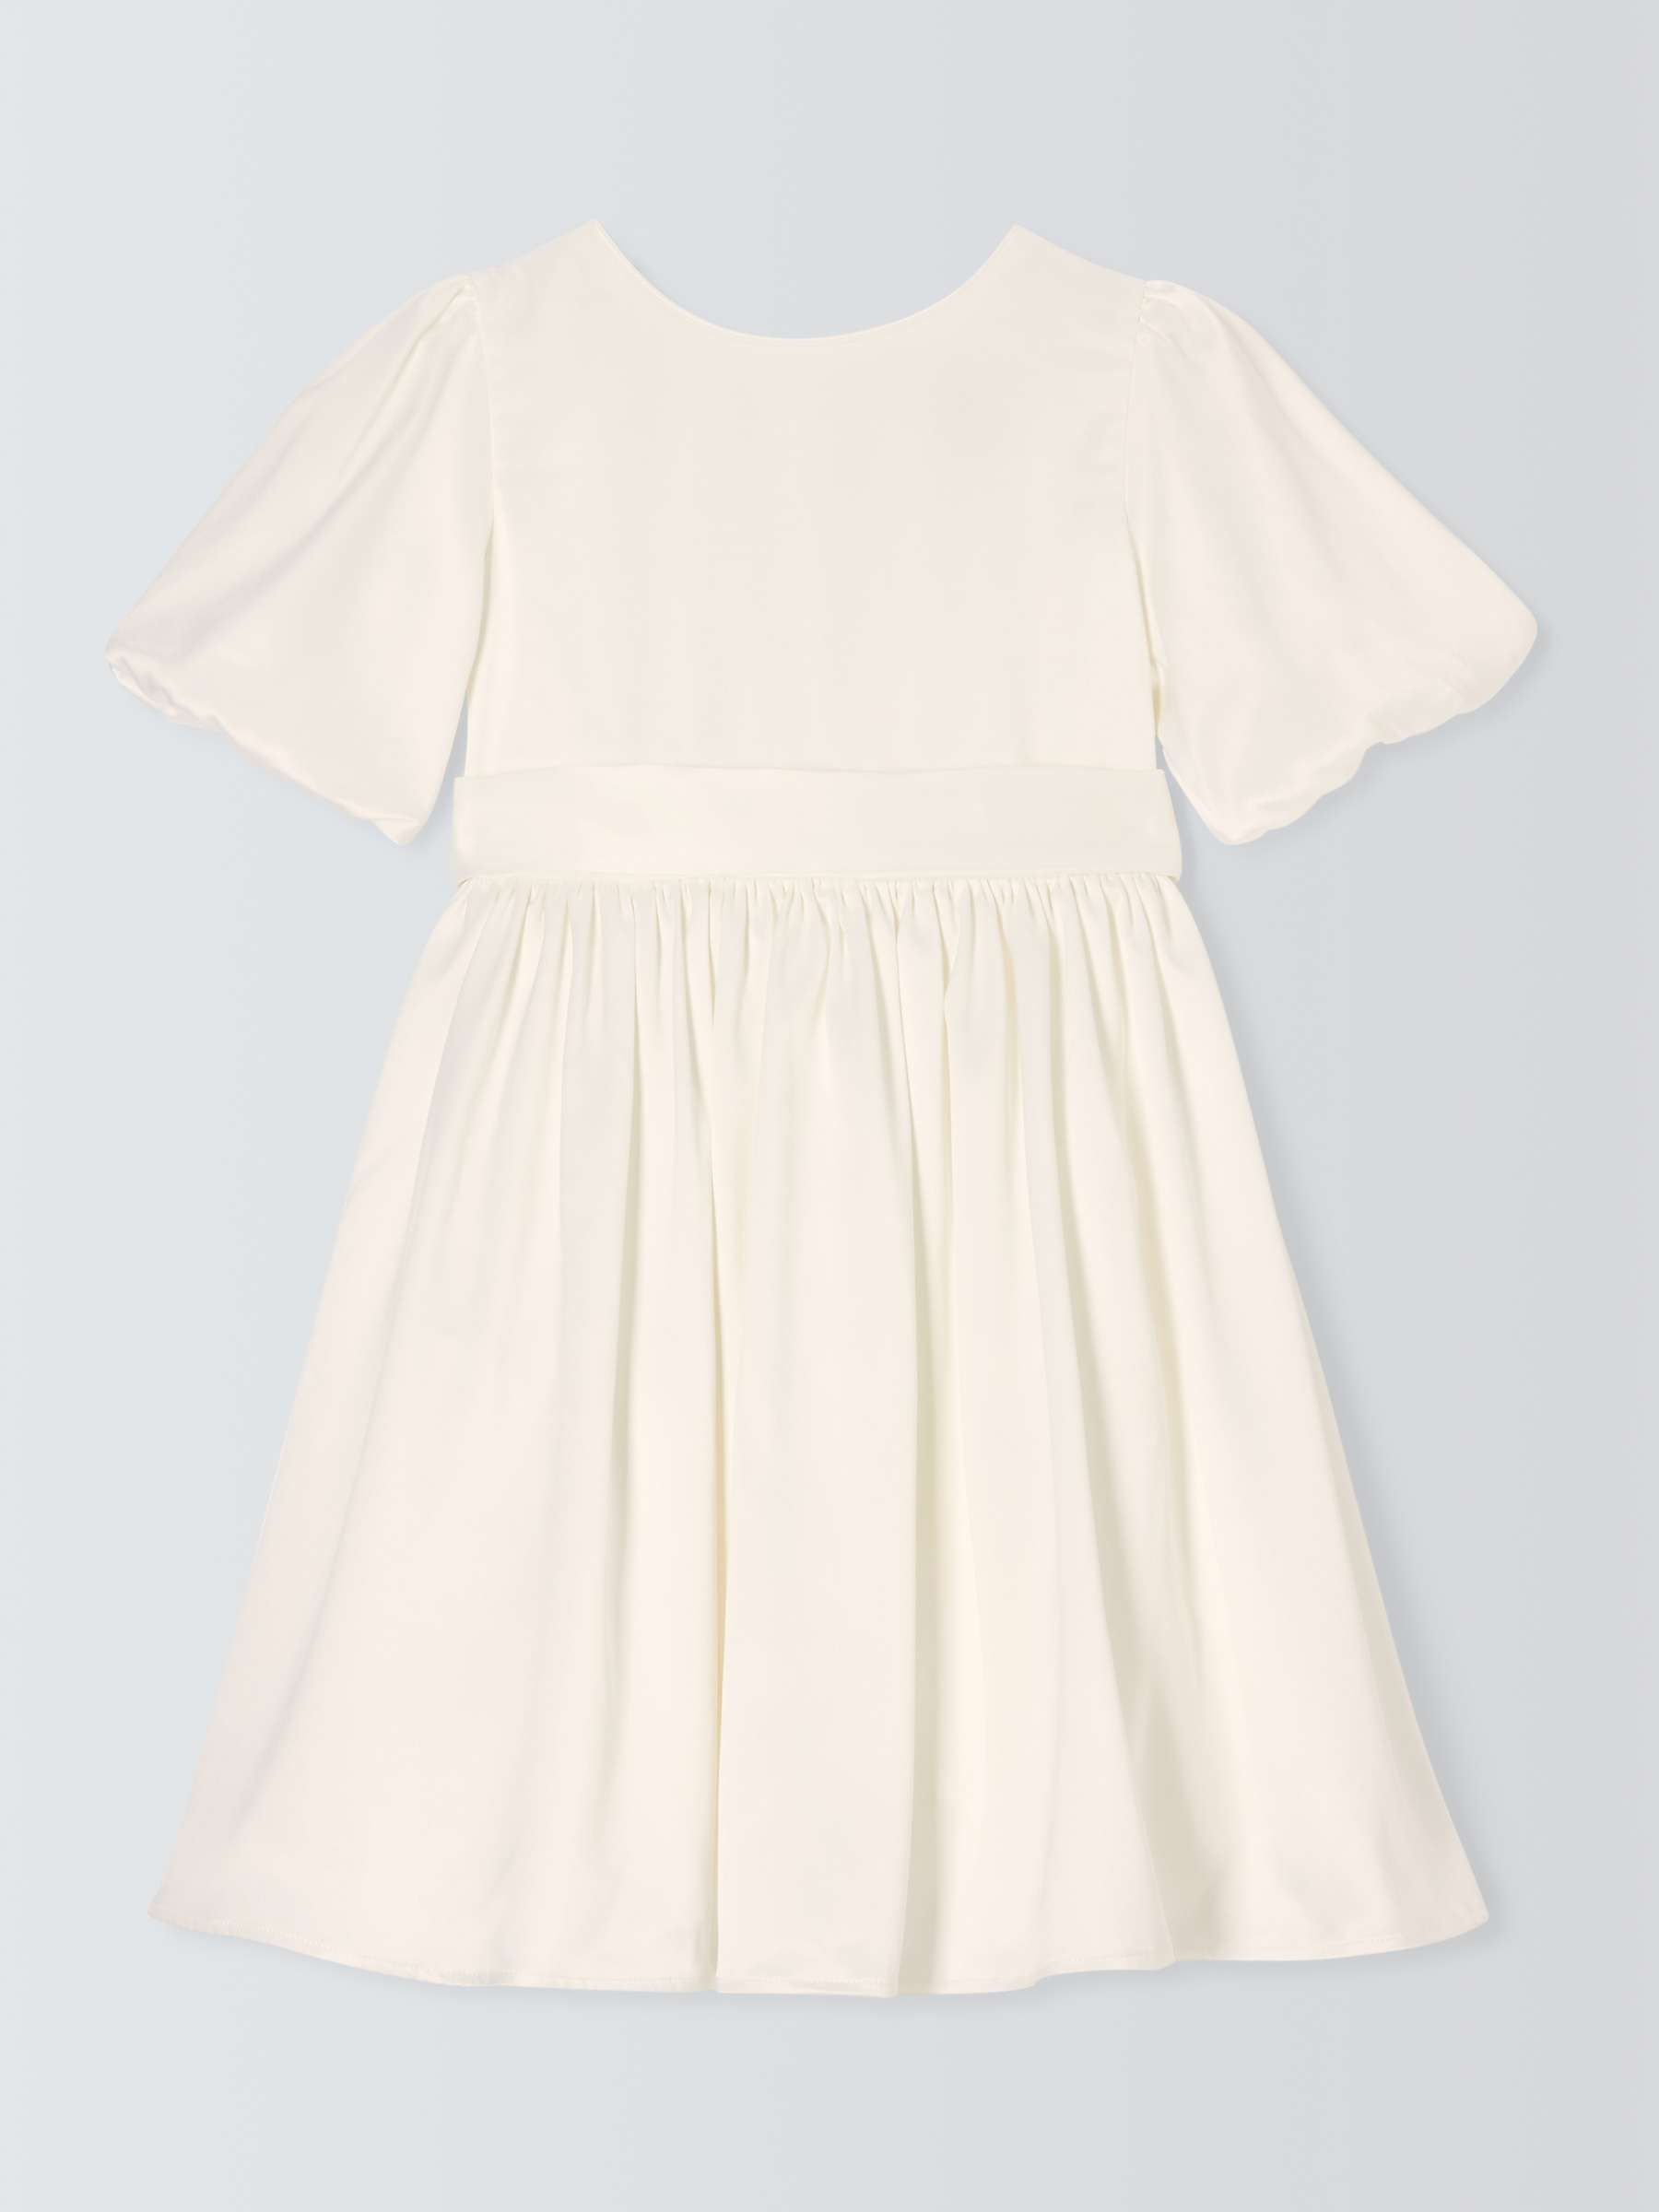 Buy John Lewis Heirloom Collection Kids' Bow Bridesmaid Dress, Ivory Online at johnlewis.com